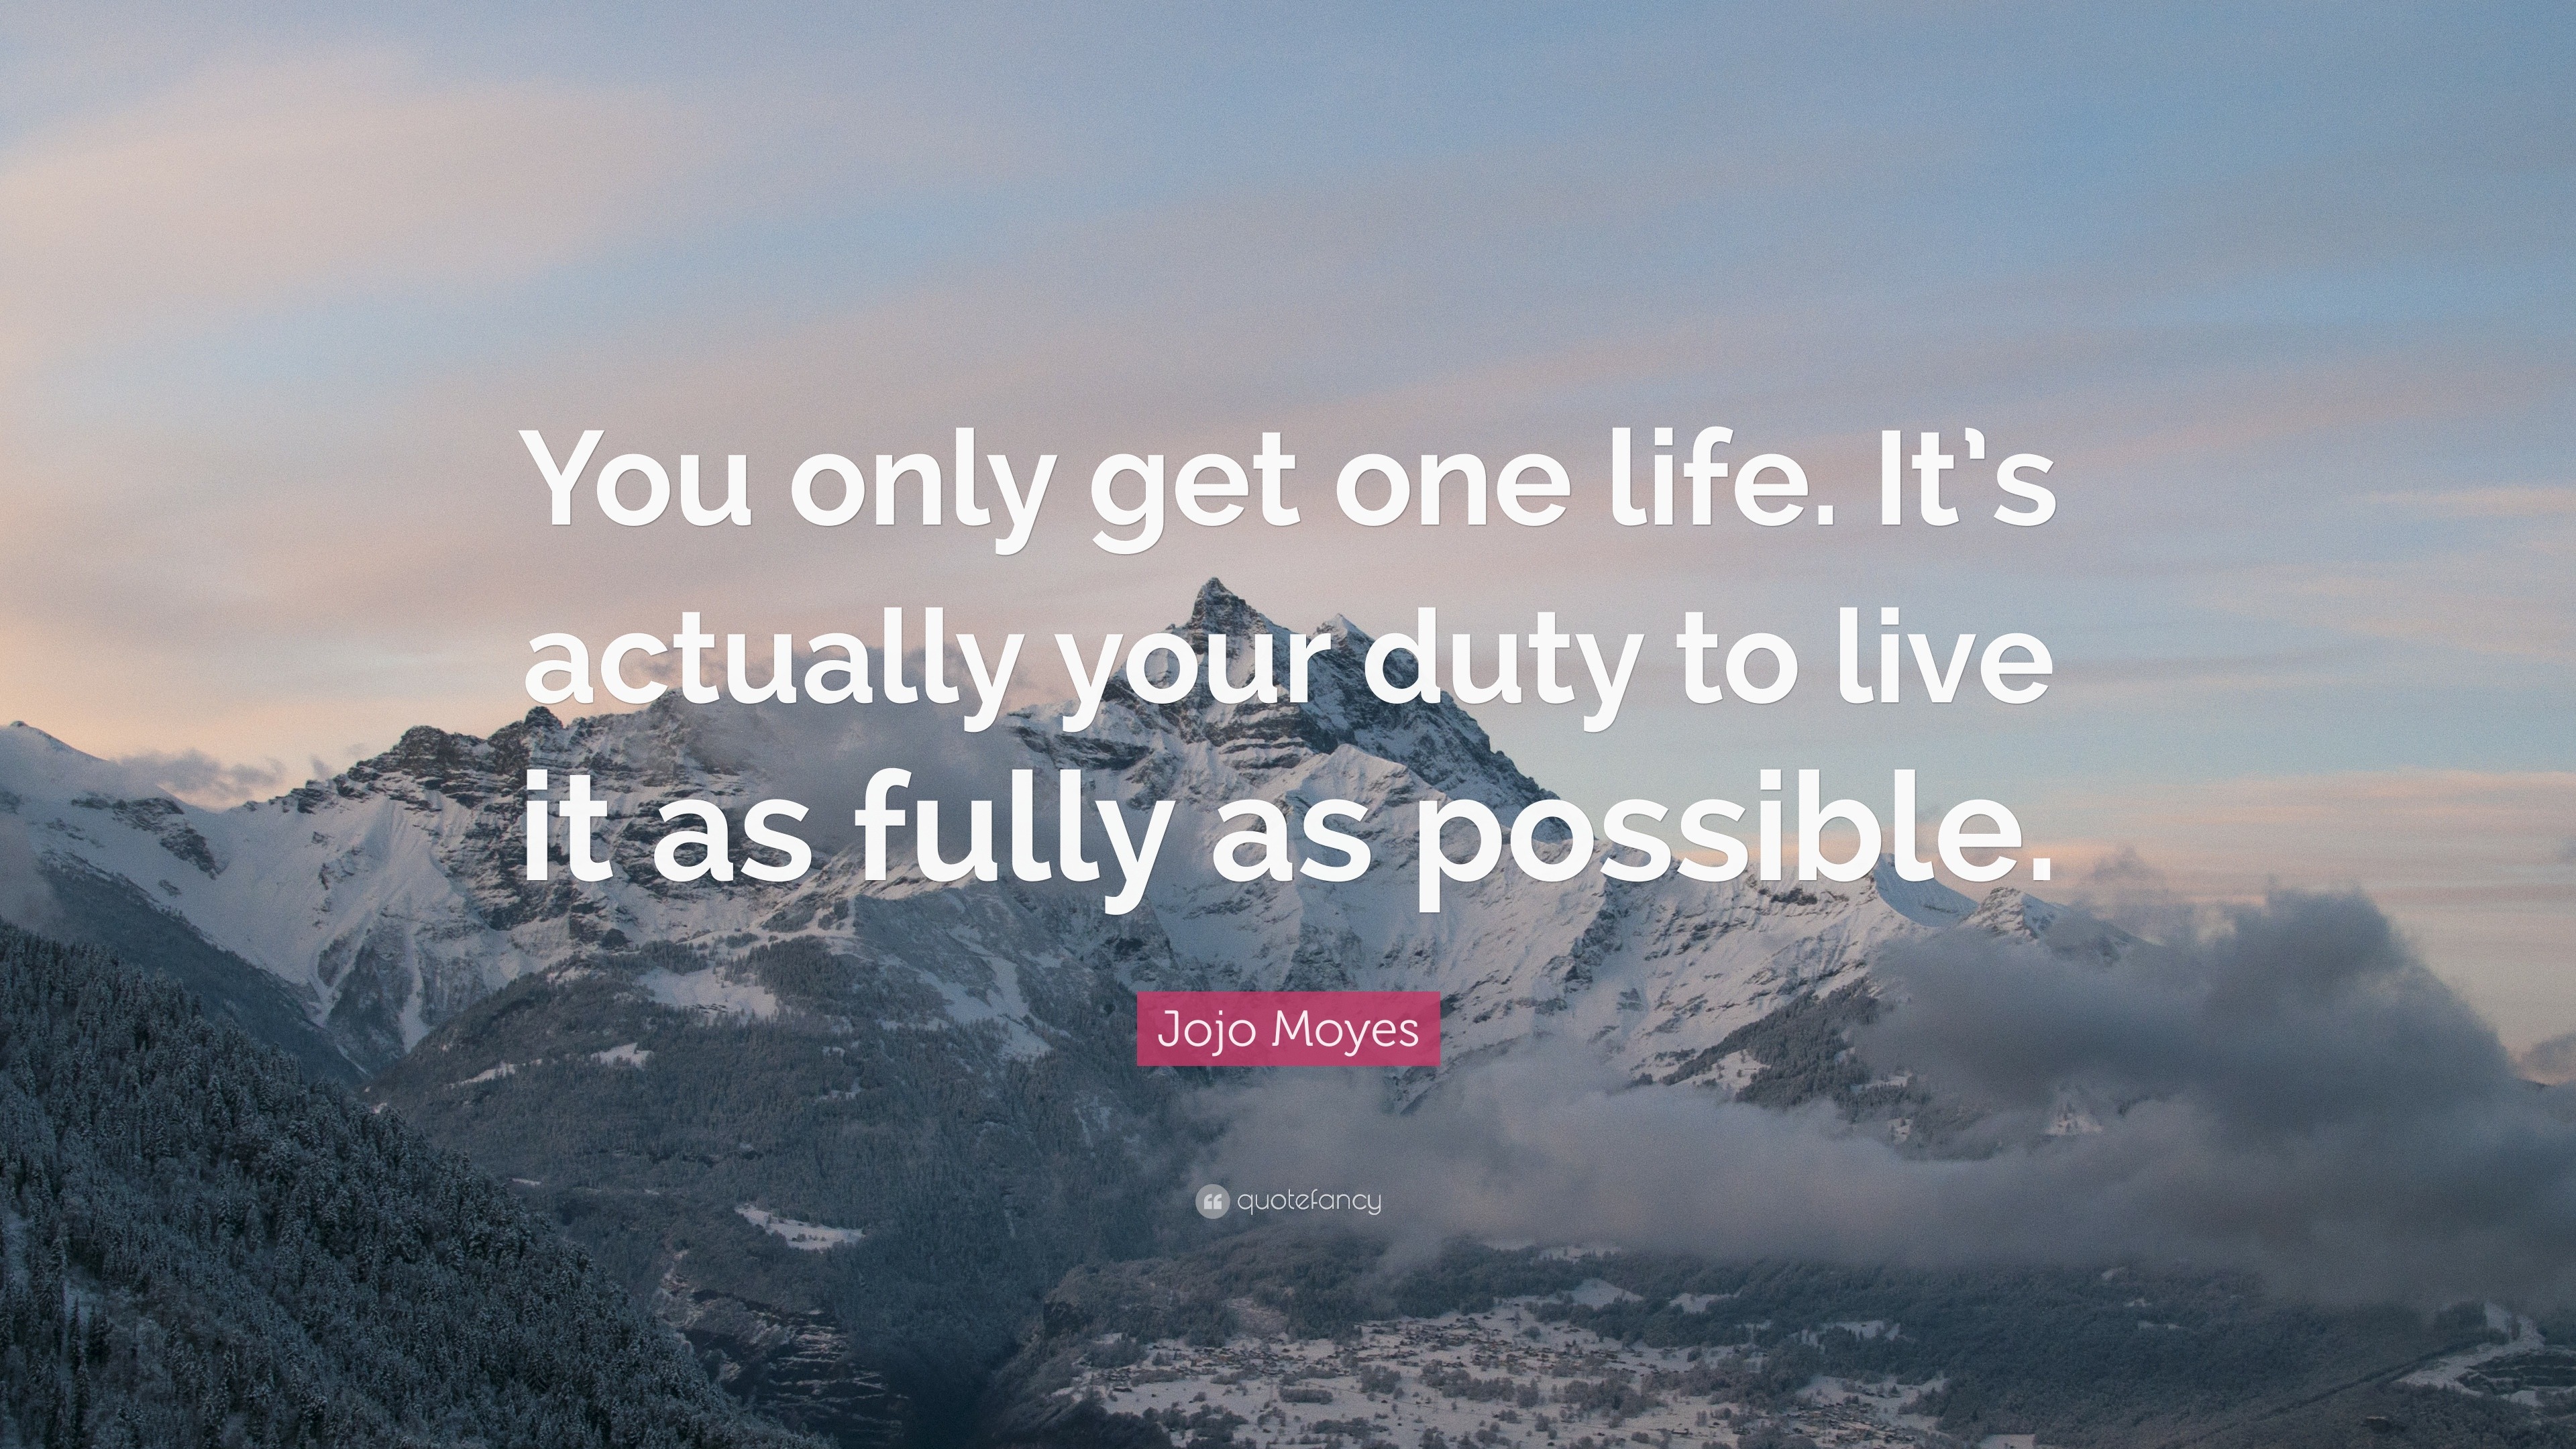 Jojo Moyes Quote: "You only get one life. It's actually ...